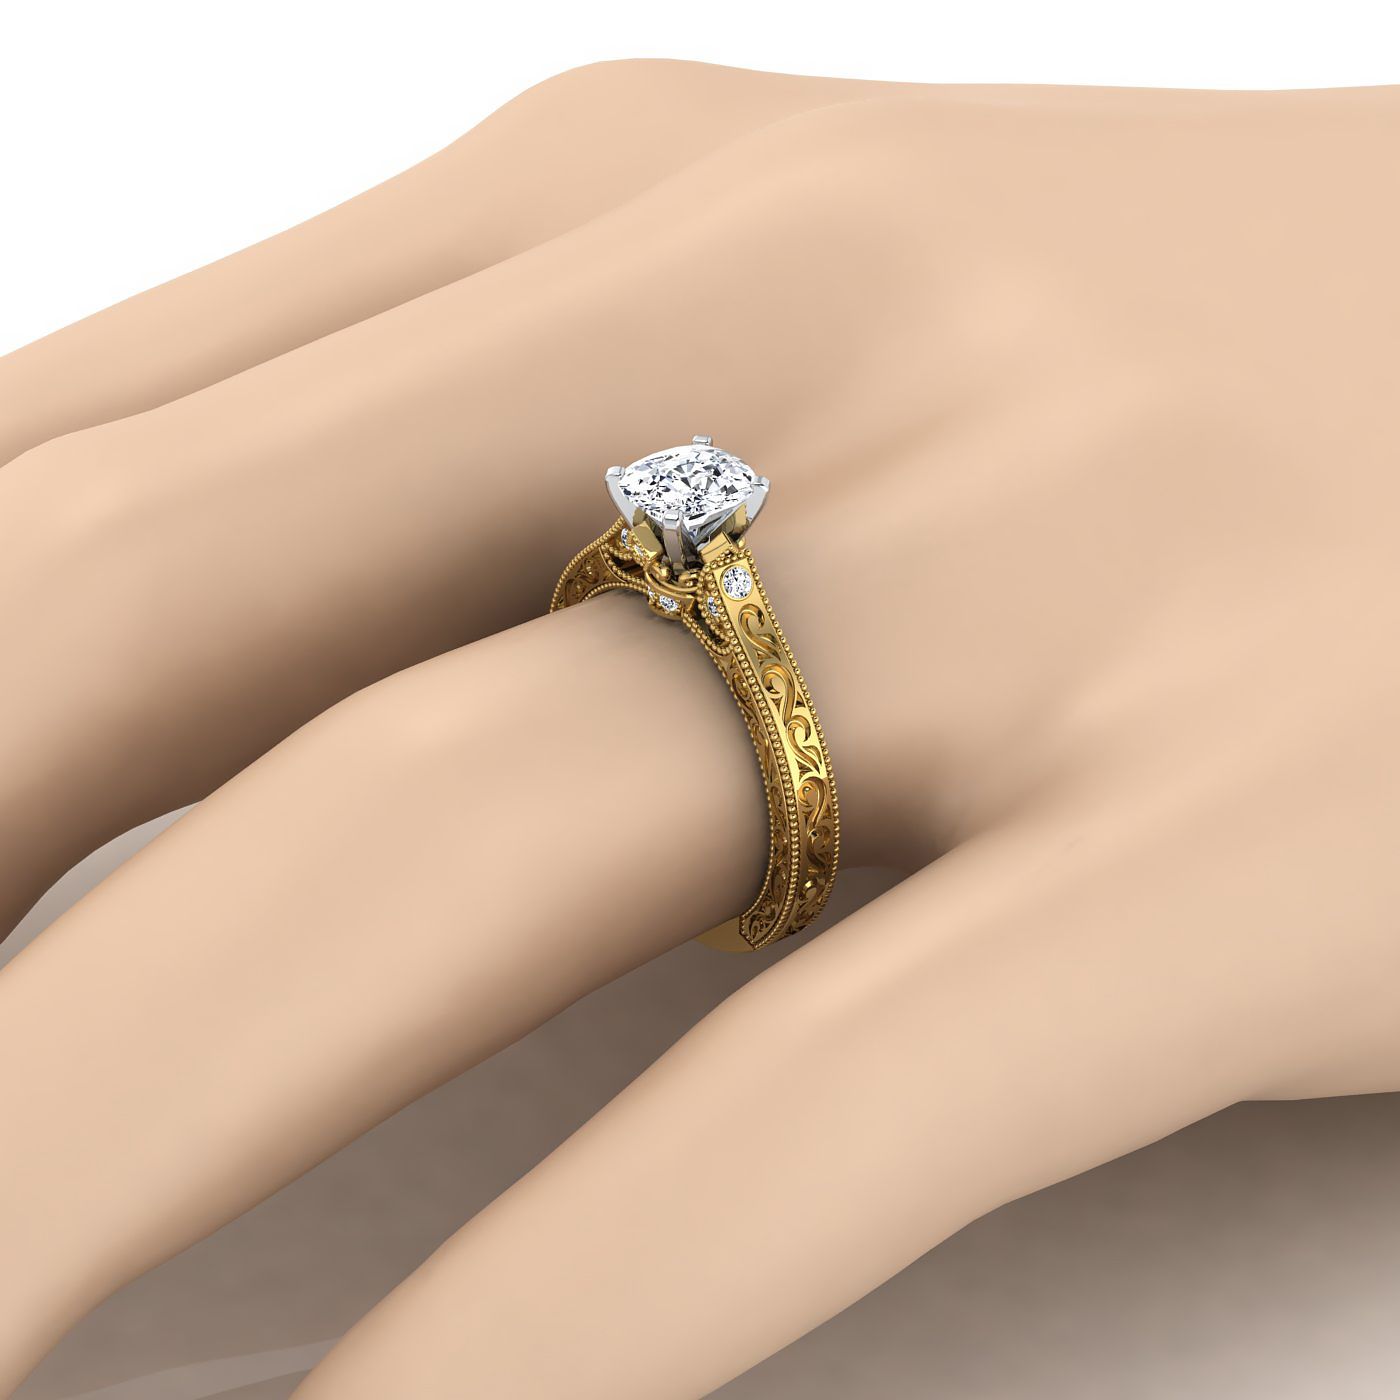 18K Yellow Gold Cushion Delicate Diamond Accented Antique Hand Engraved Engagement Ring -1/10ctw